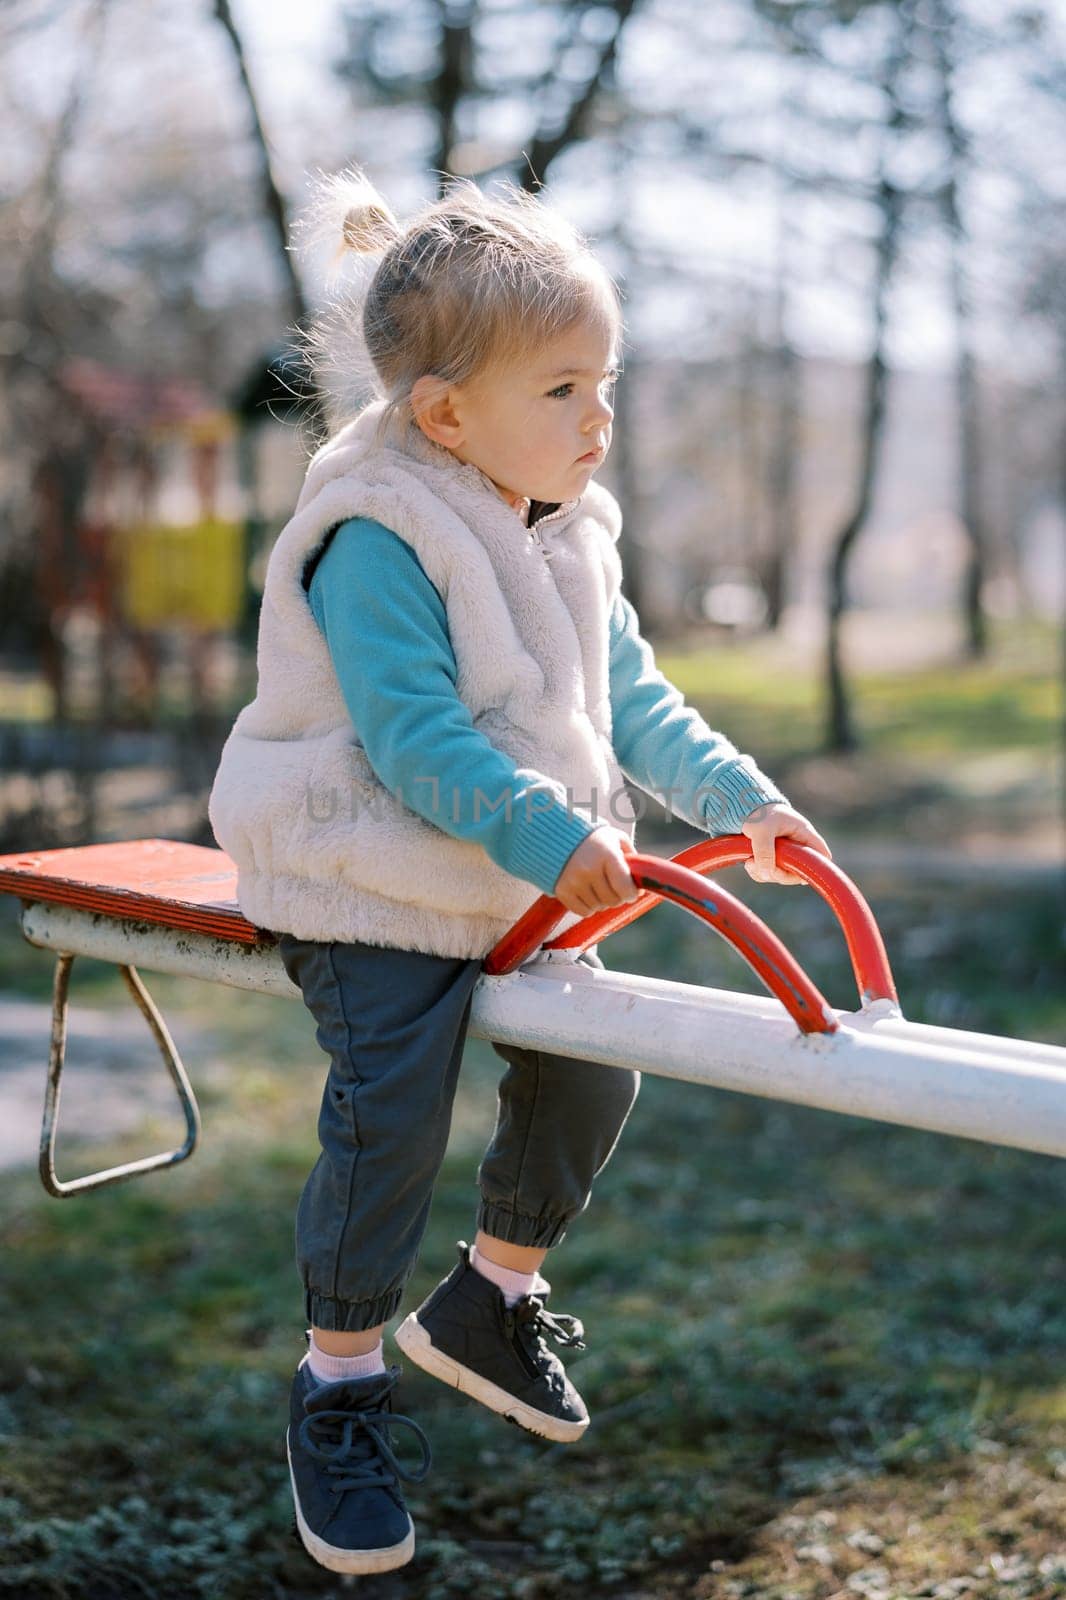 Little girl sits on a metal swing-balancer and holds on to the handles. High quality photo